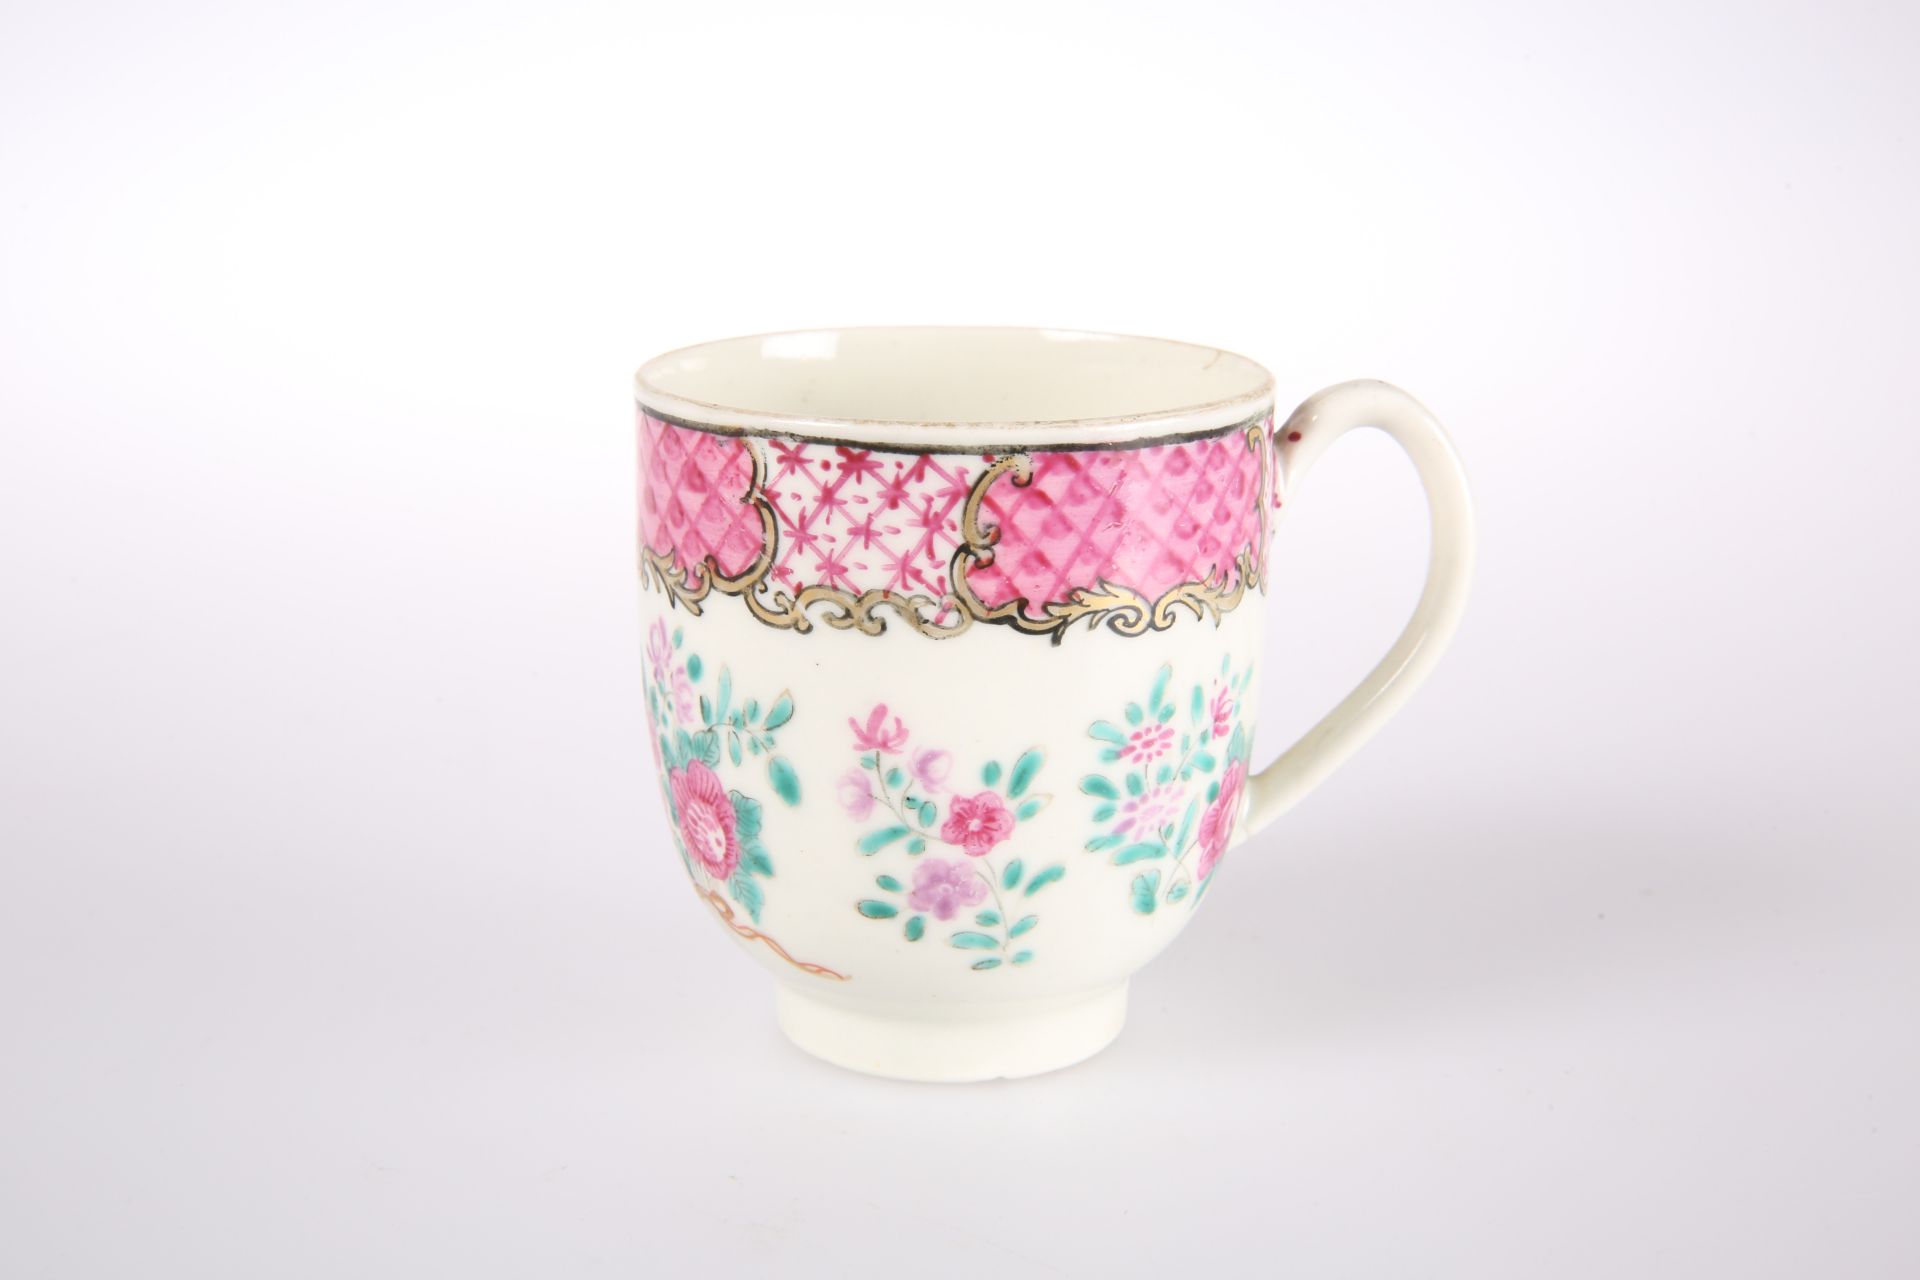 A WORCESTER POLYCHROME COFFEE CUP, CIRCA 1770